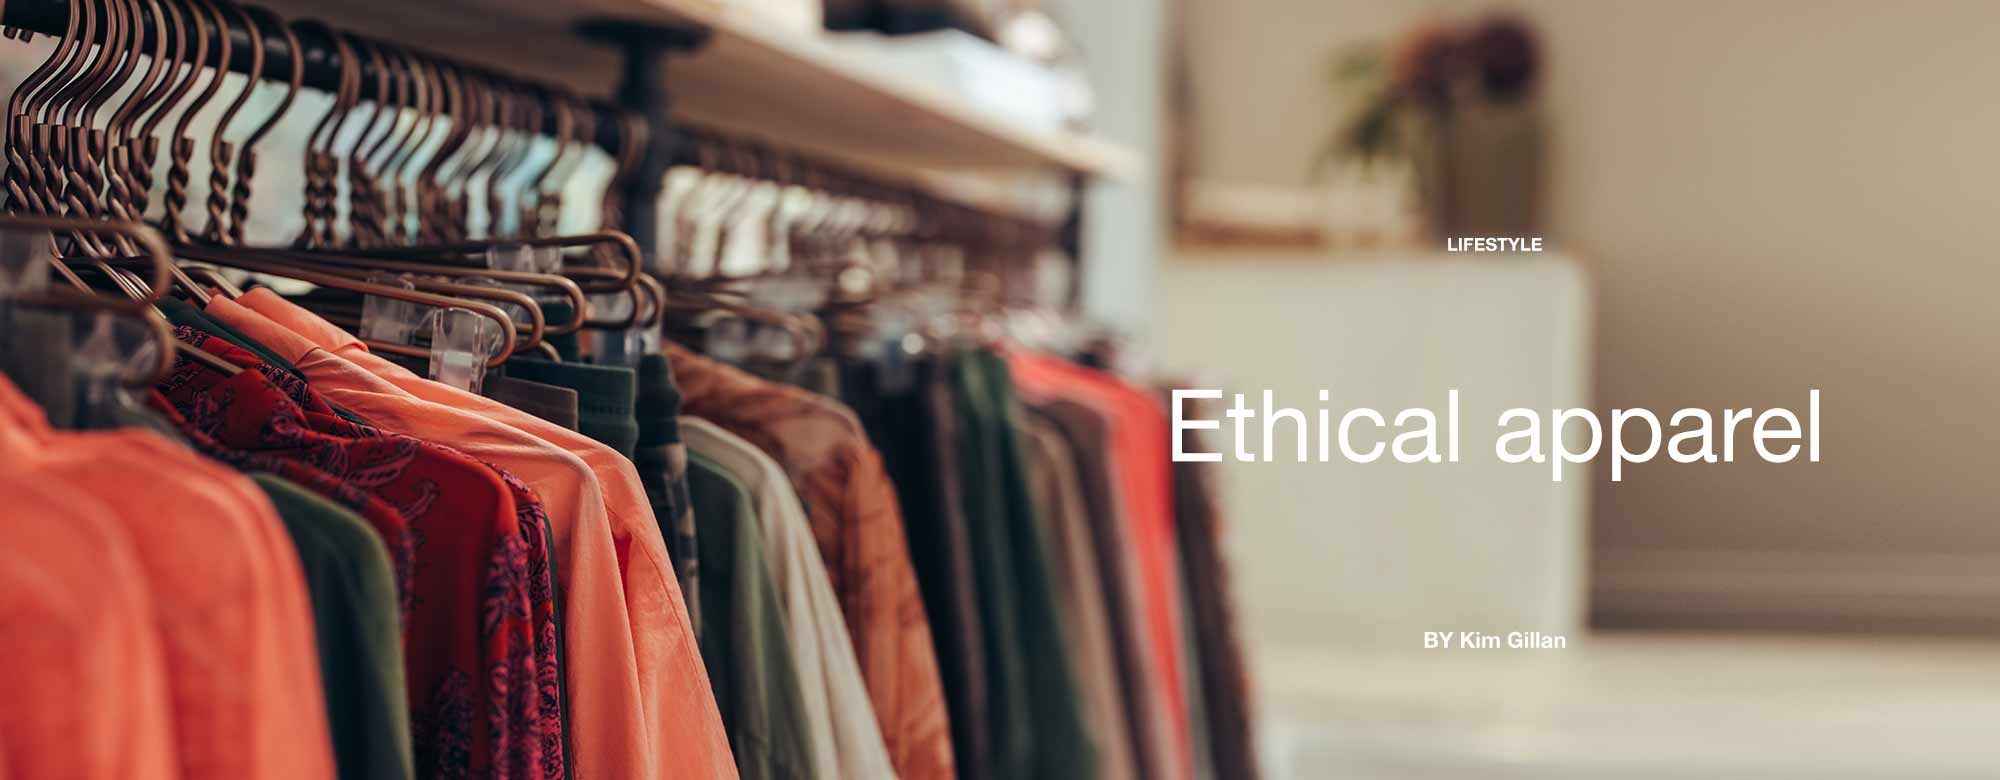 Ethical apparel